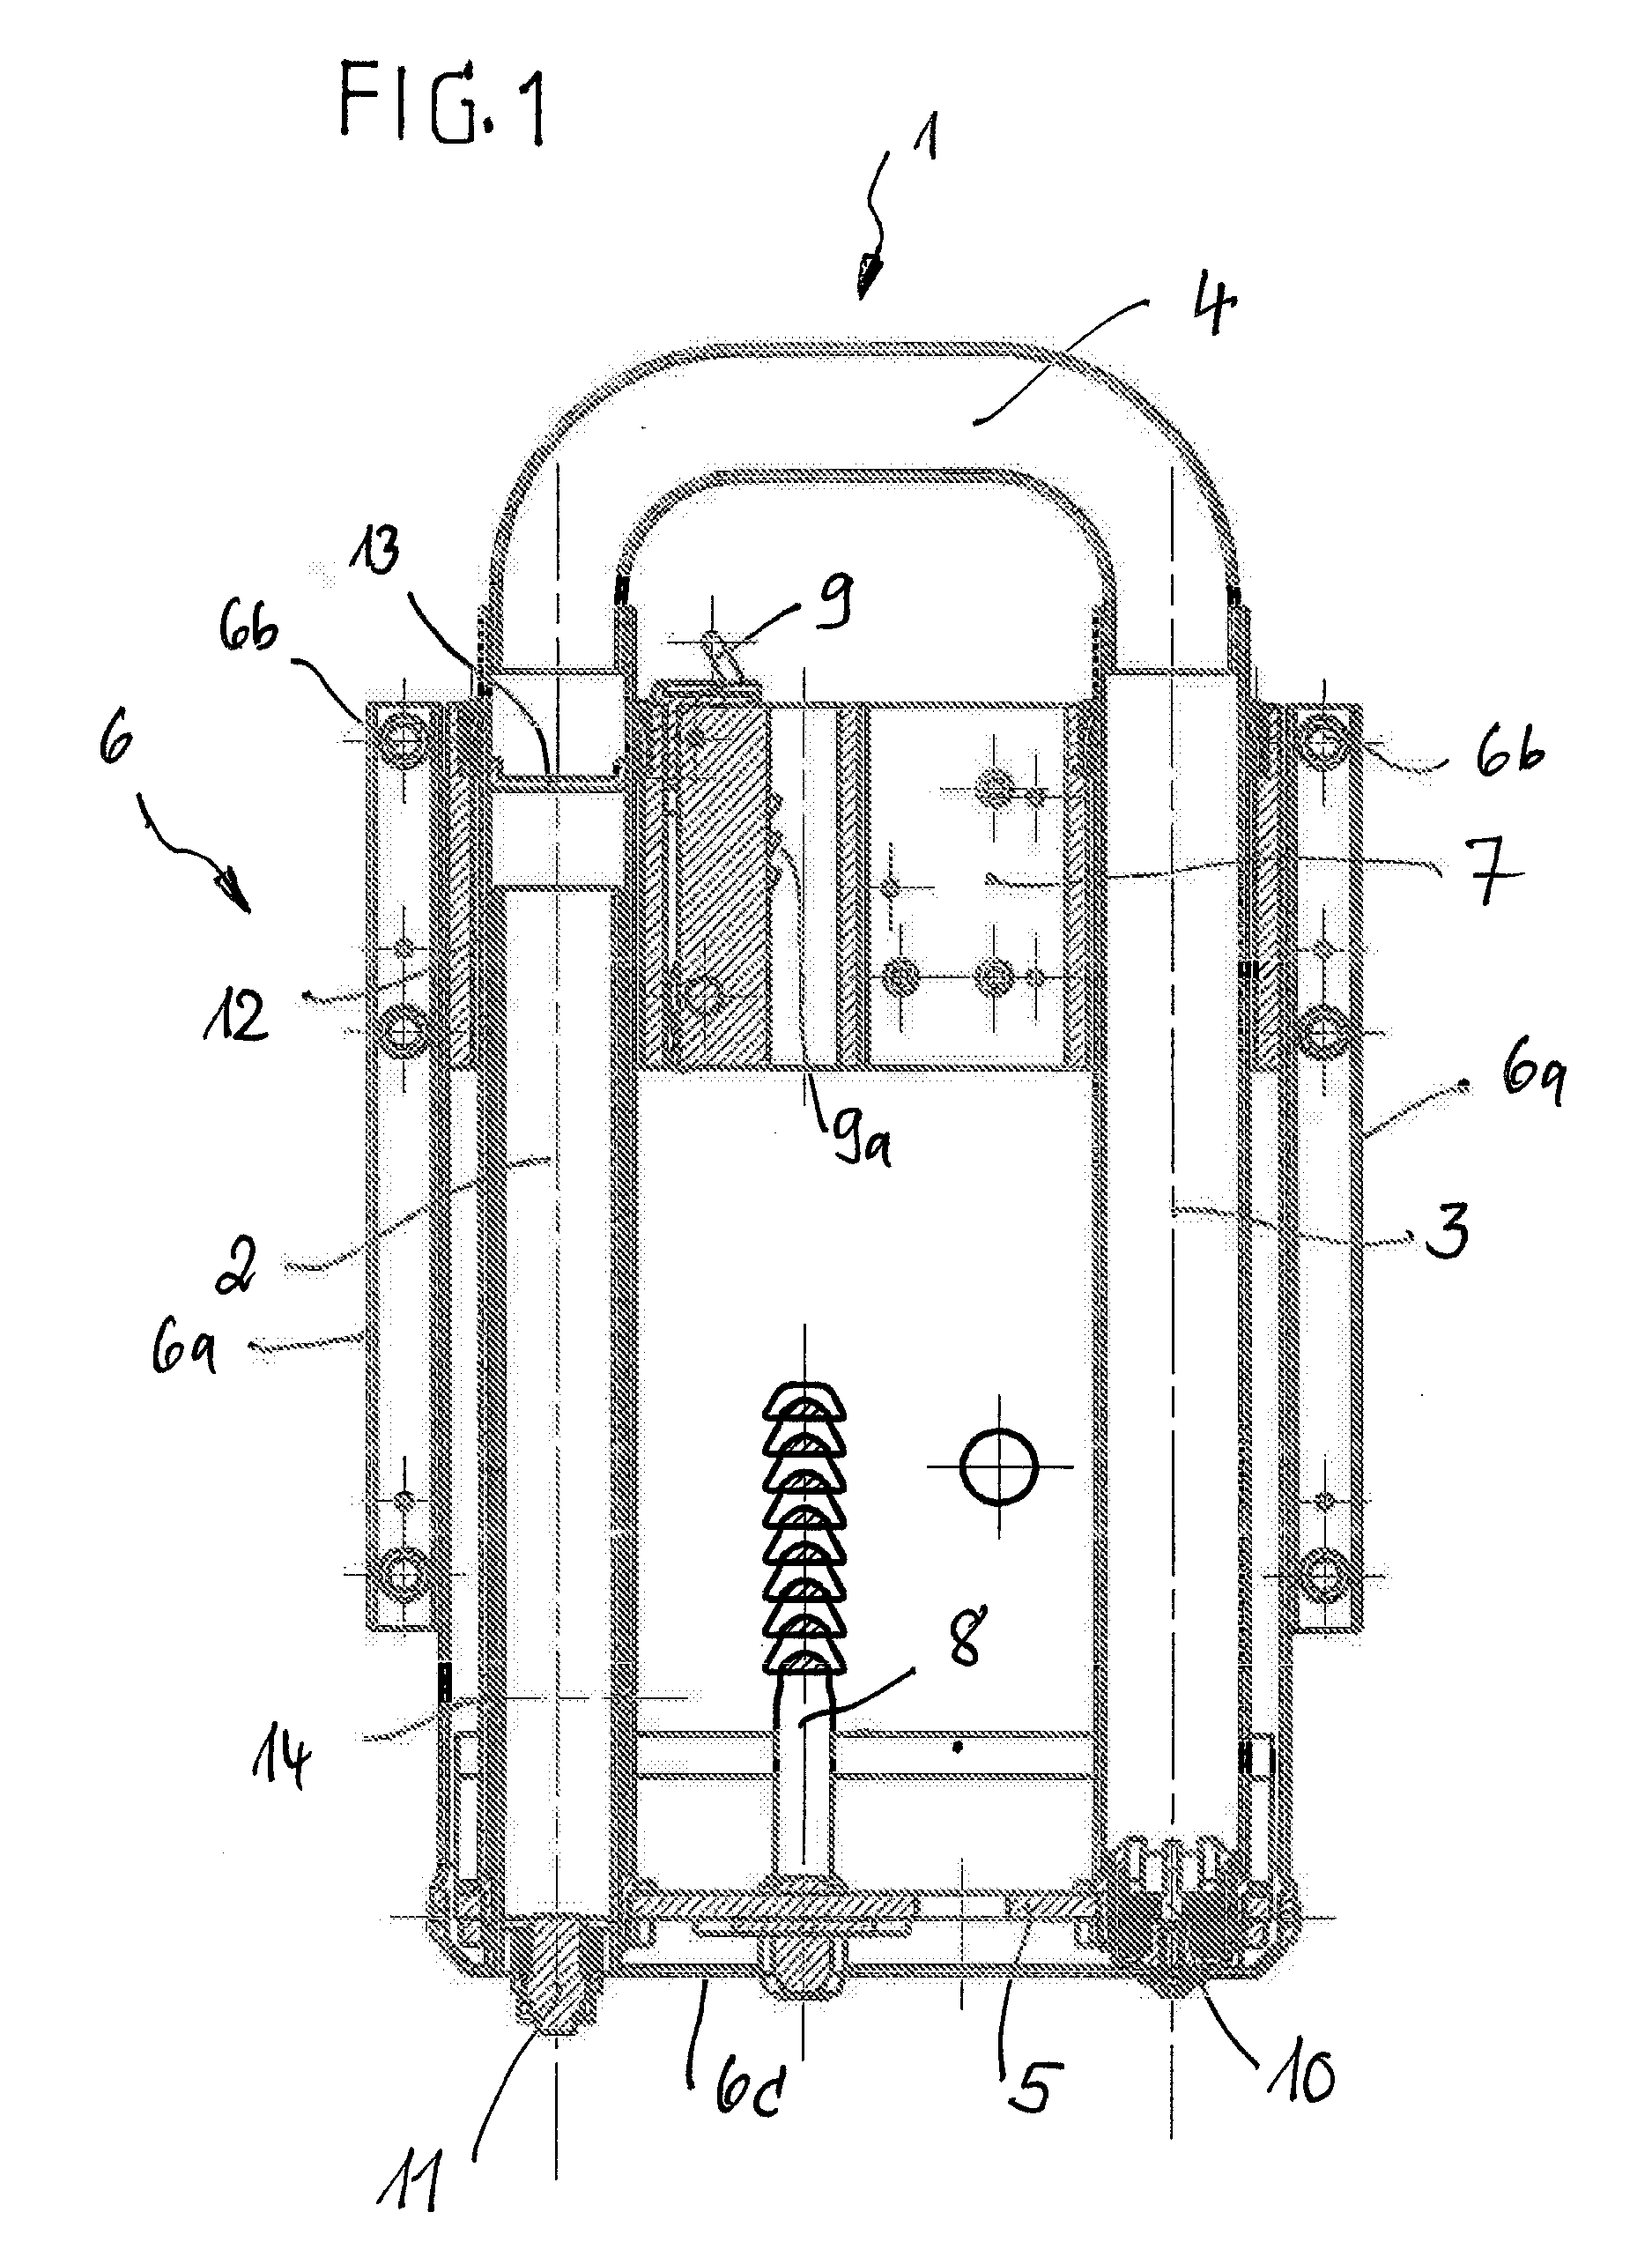 Protection device in motor vehicles for protecting individuals